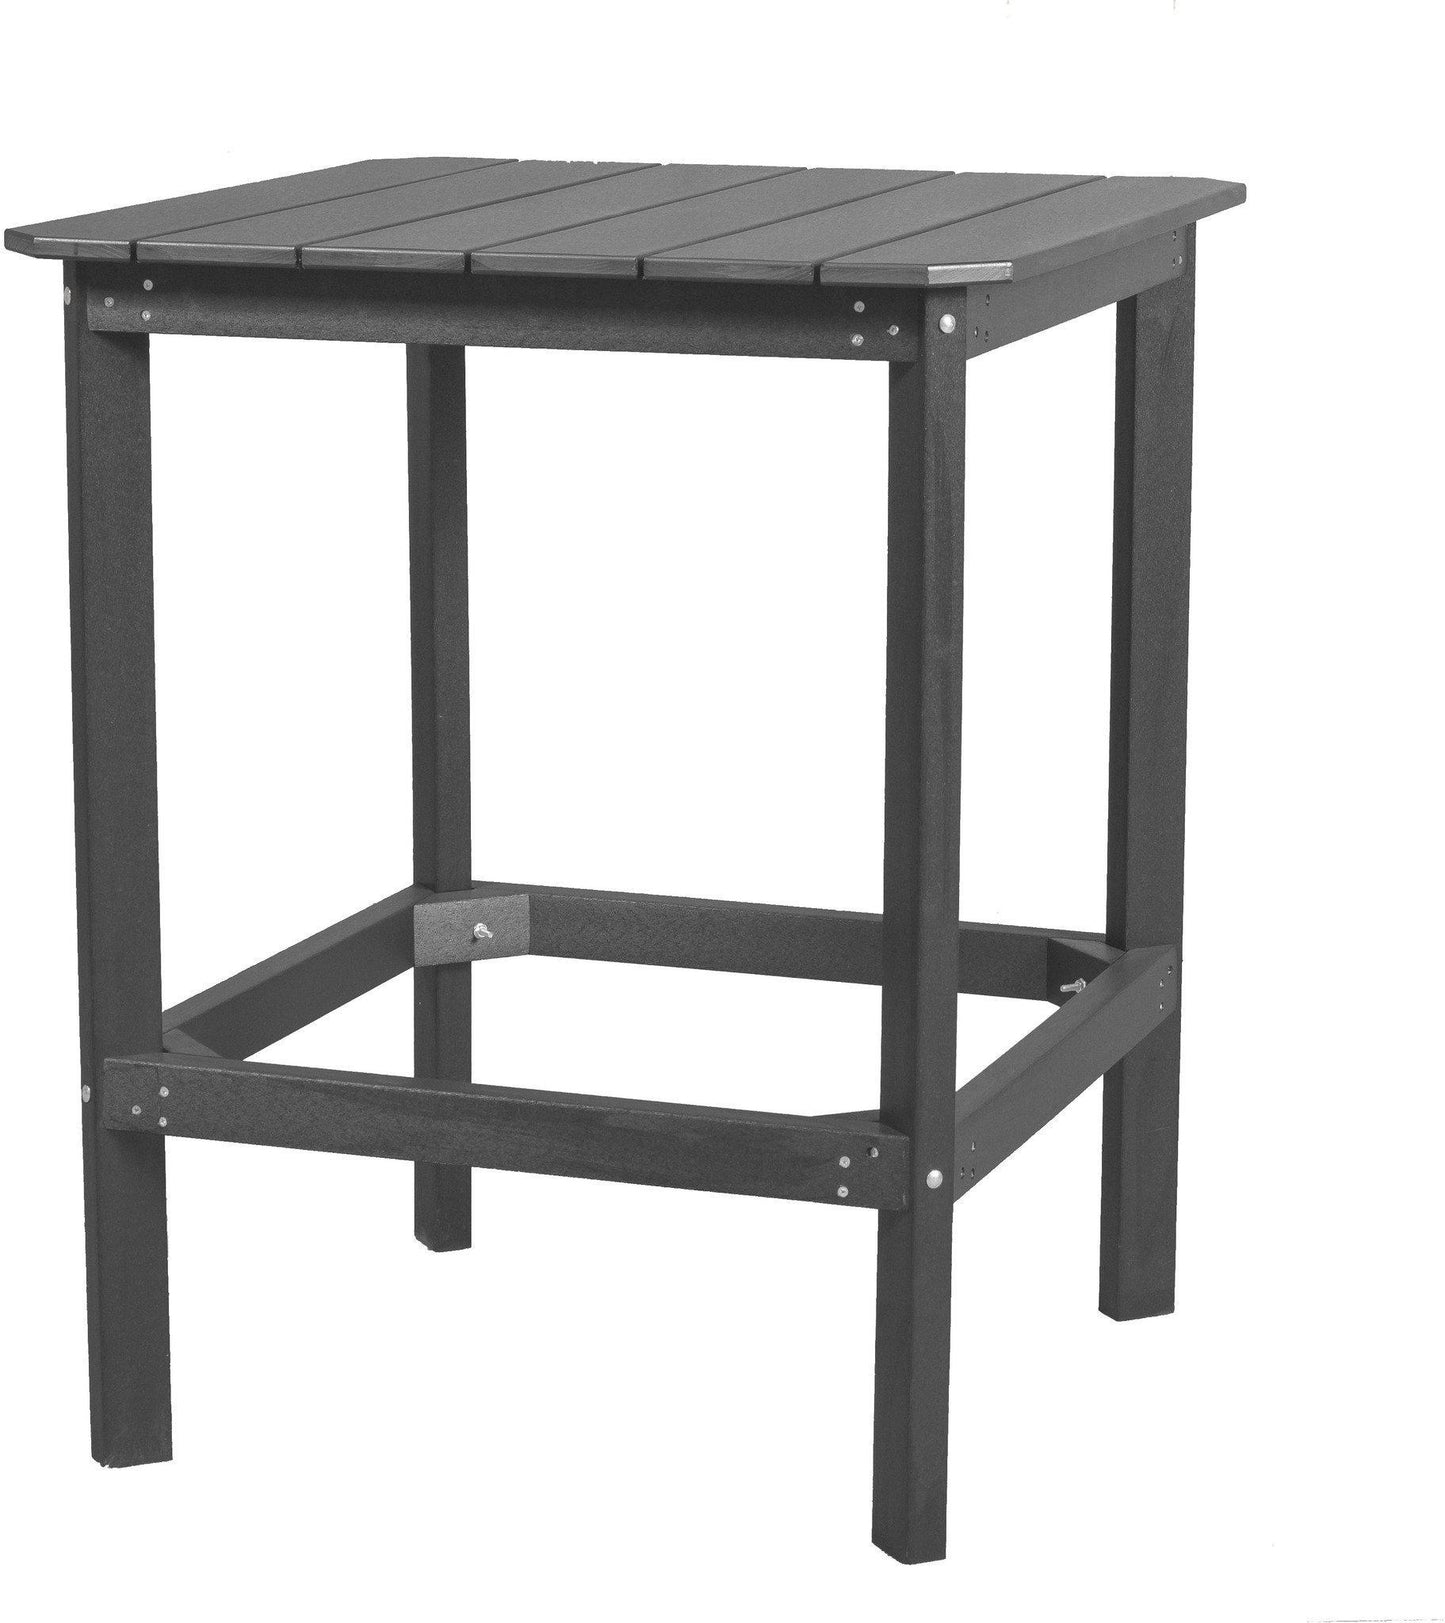 Wildridge Recycled Plastic Classic High 40H" Square Patio Dining Table - LCC-287 - LEAD TIME TO SHIP 6 WEEKS OR LESS